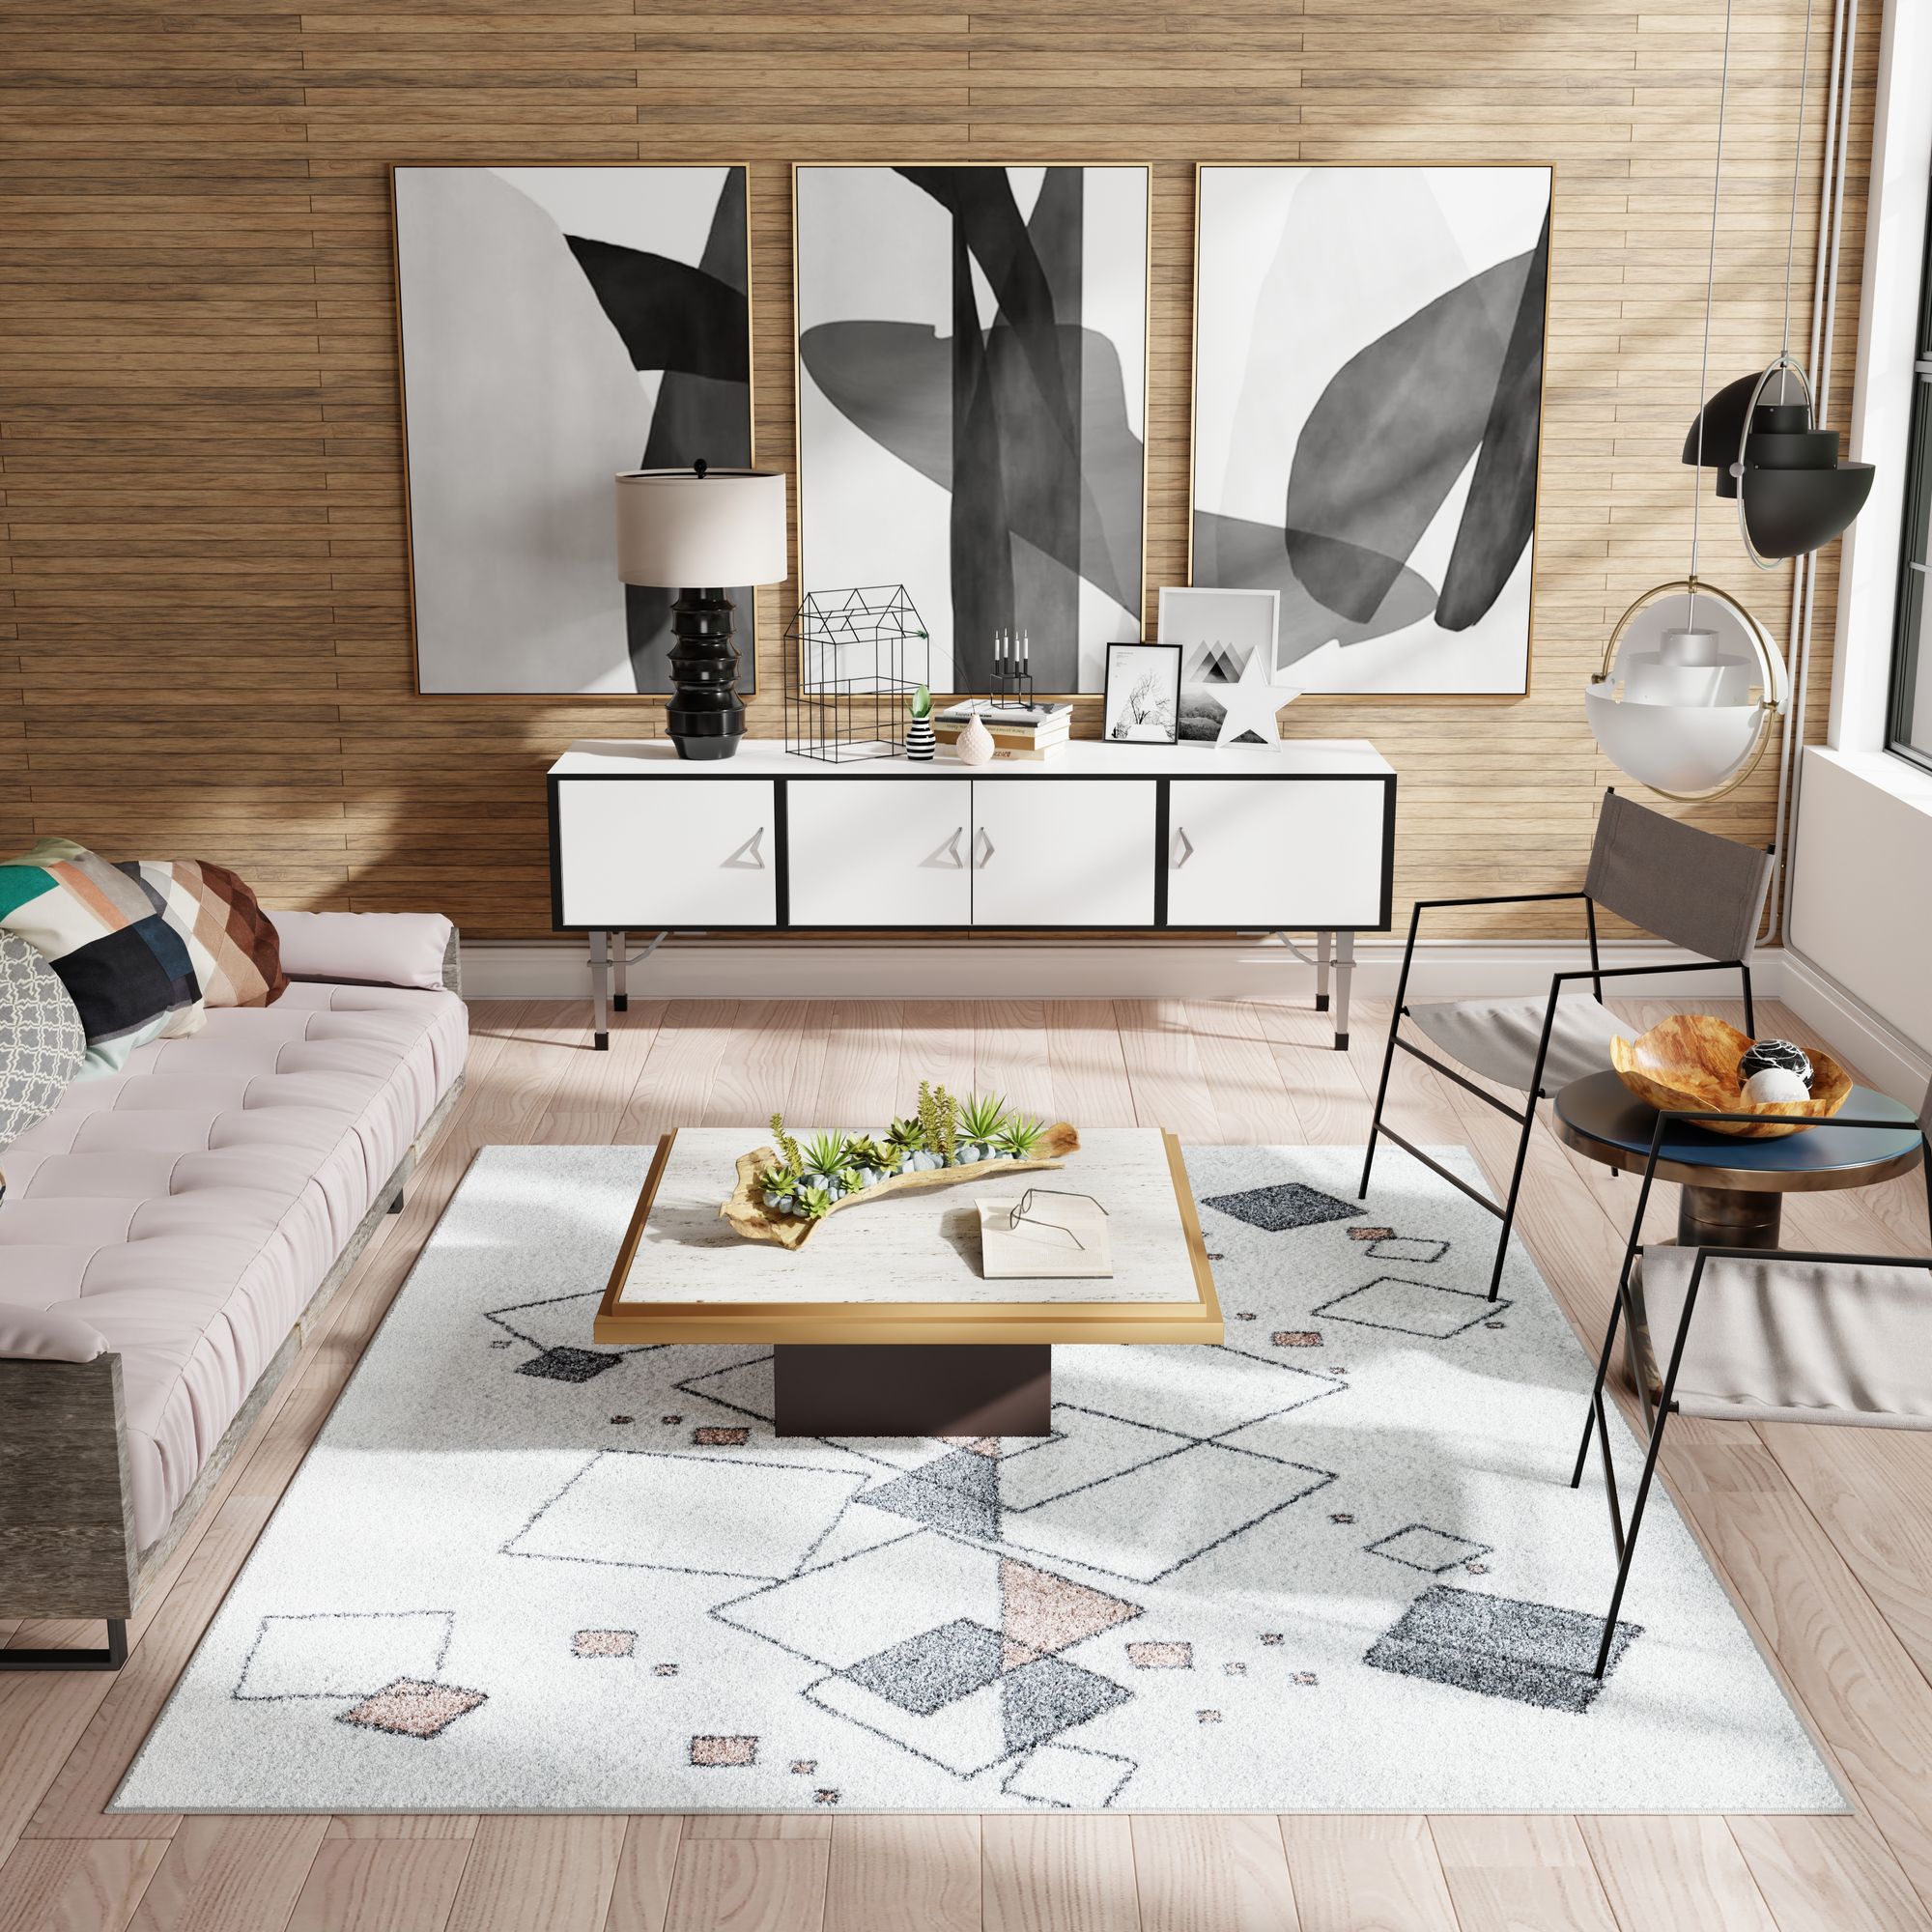 Modern living room with a white sofa, geometric-patterned rug, minimalist coffee table with a plant centerpiece, and white sideboard.